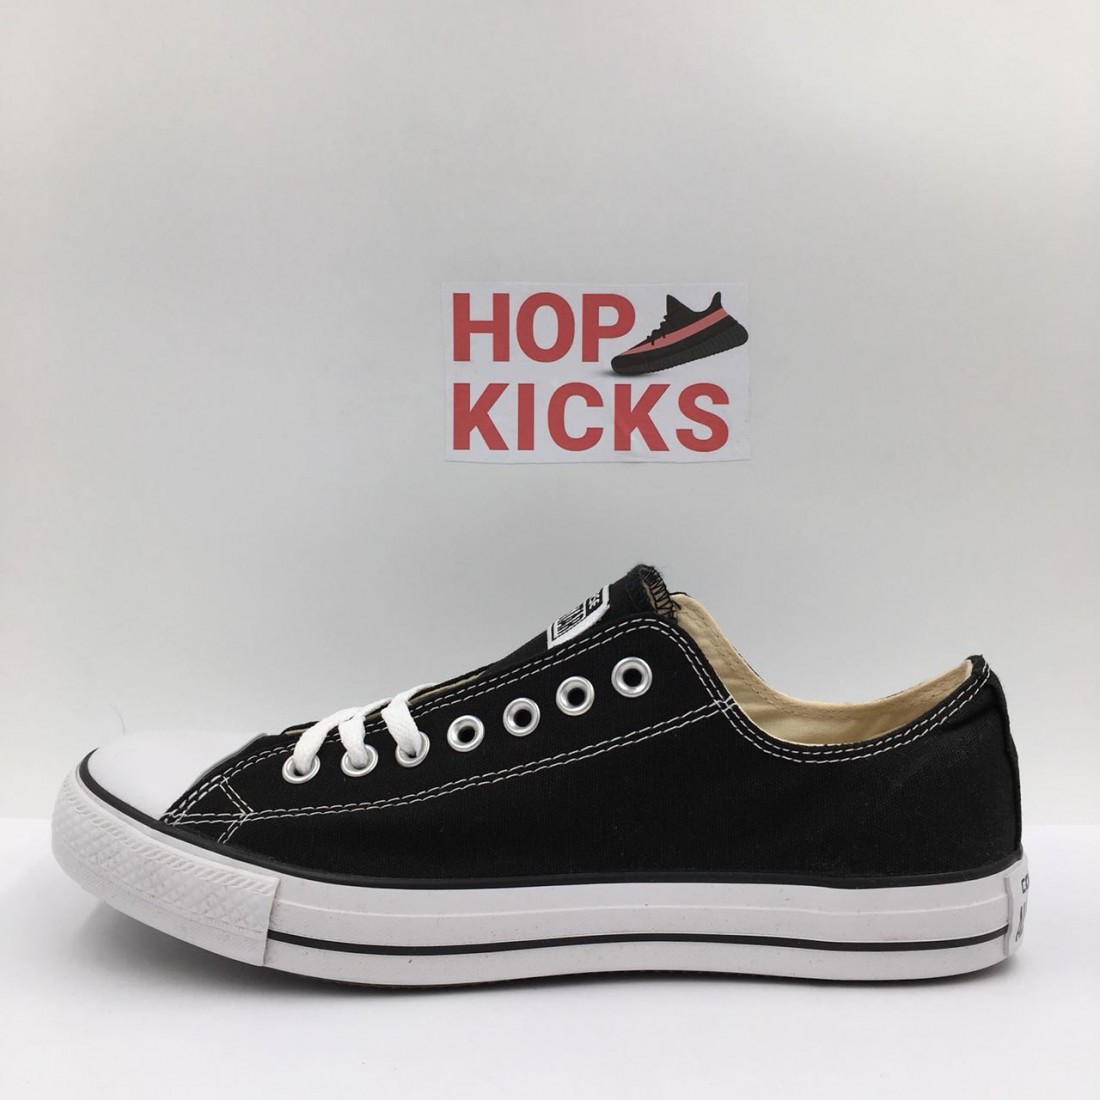 Buy Online Converse Star Black/White Low [ TOP BATCH / PREMIUM MATERIALS] In Pakistan | Converse All Star Black/White Low [ TOP BATCH / PREMIUM MATERIALS] Prices In Pakistan